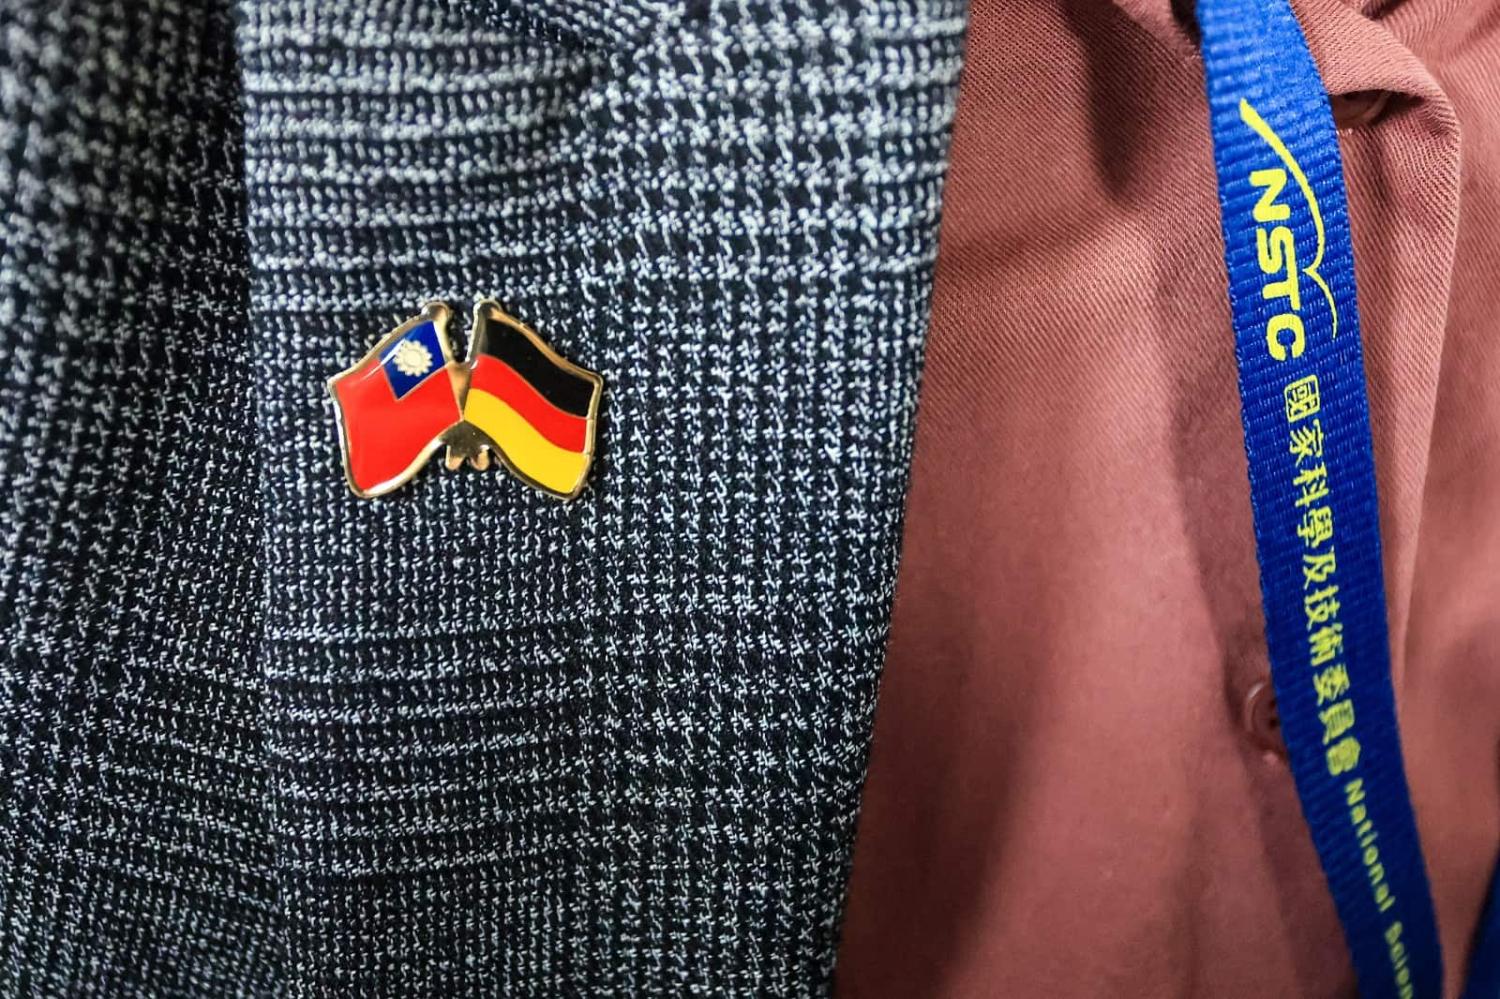 A diplomat wears a Taiwan-Germany pin during a German ministerial delegation visiting Taiwan to sign an agreement on semiconductors, Taipei, 21 March 2023 (Ceng Shou Yi/NurPhoto via Getty Images)